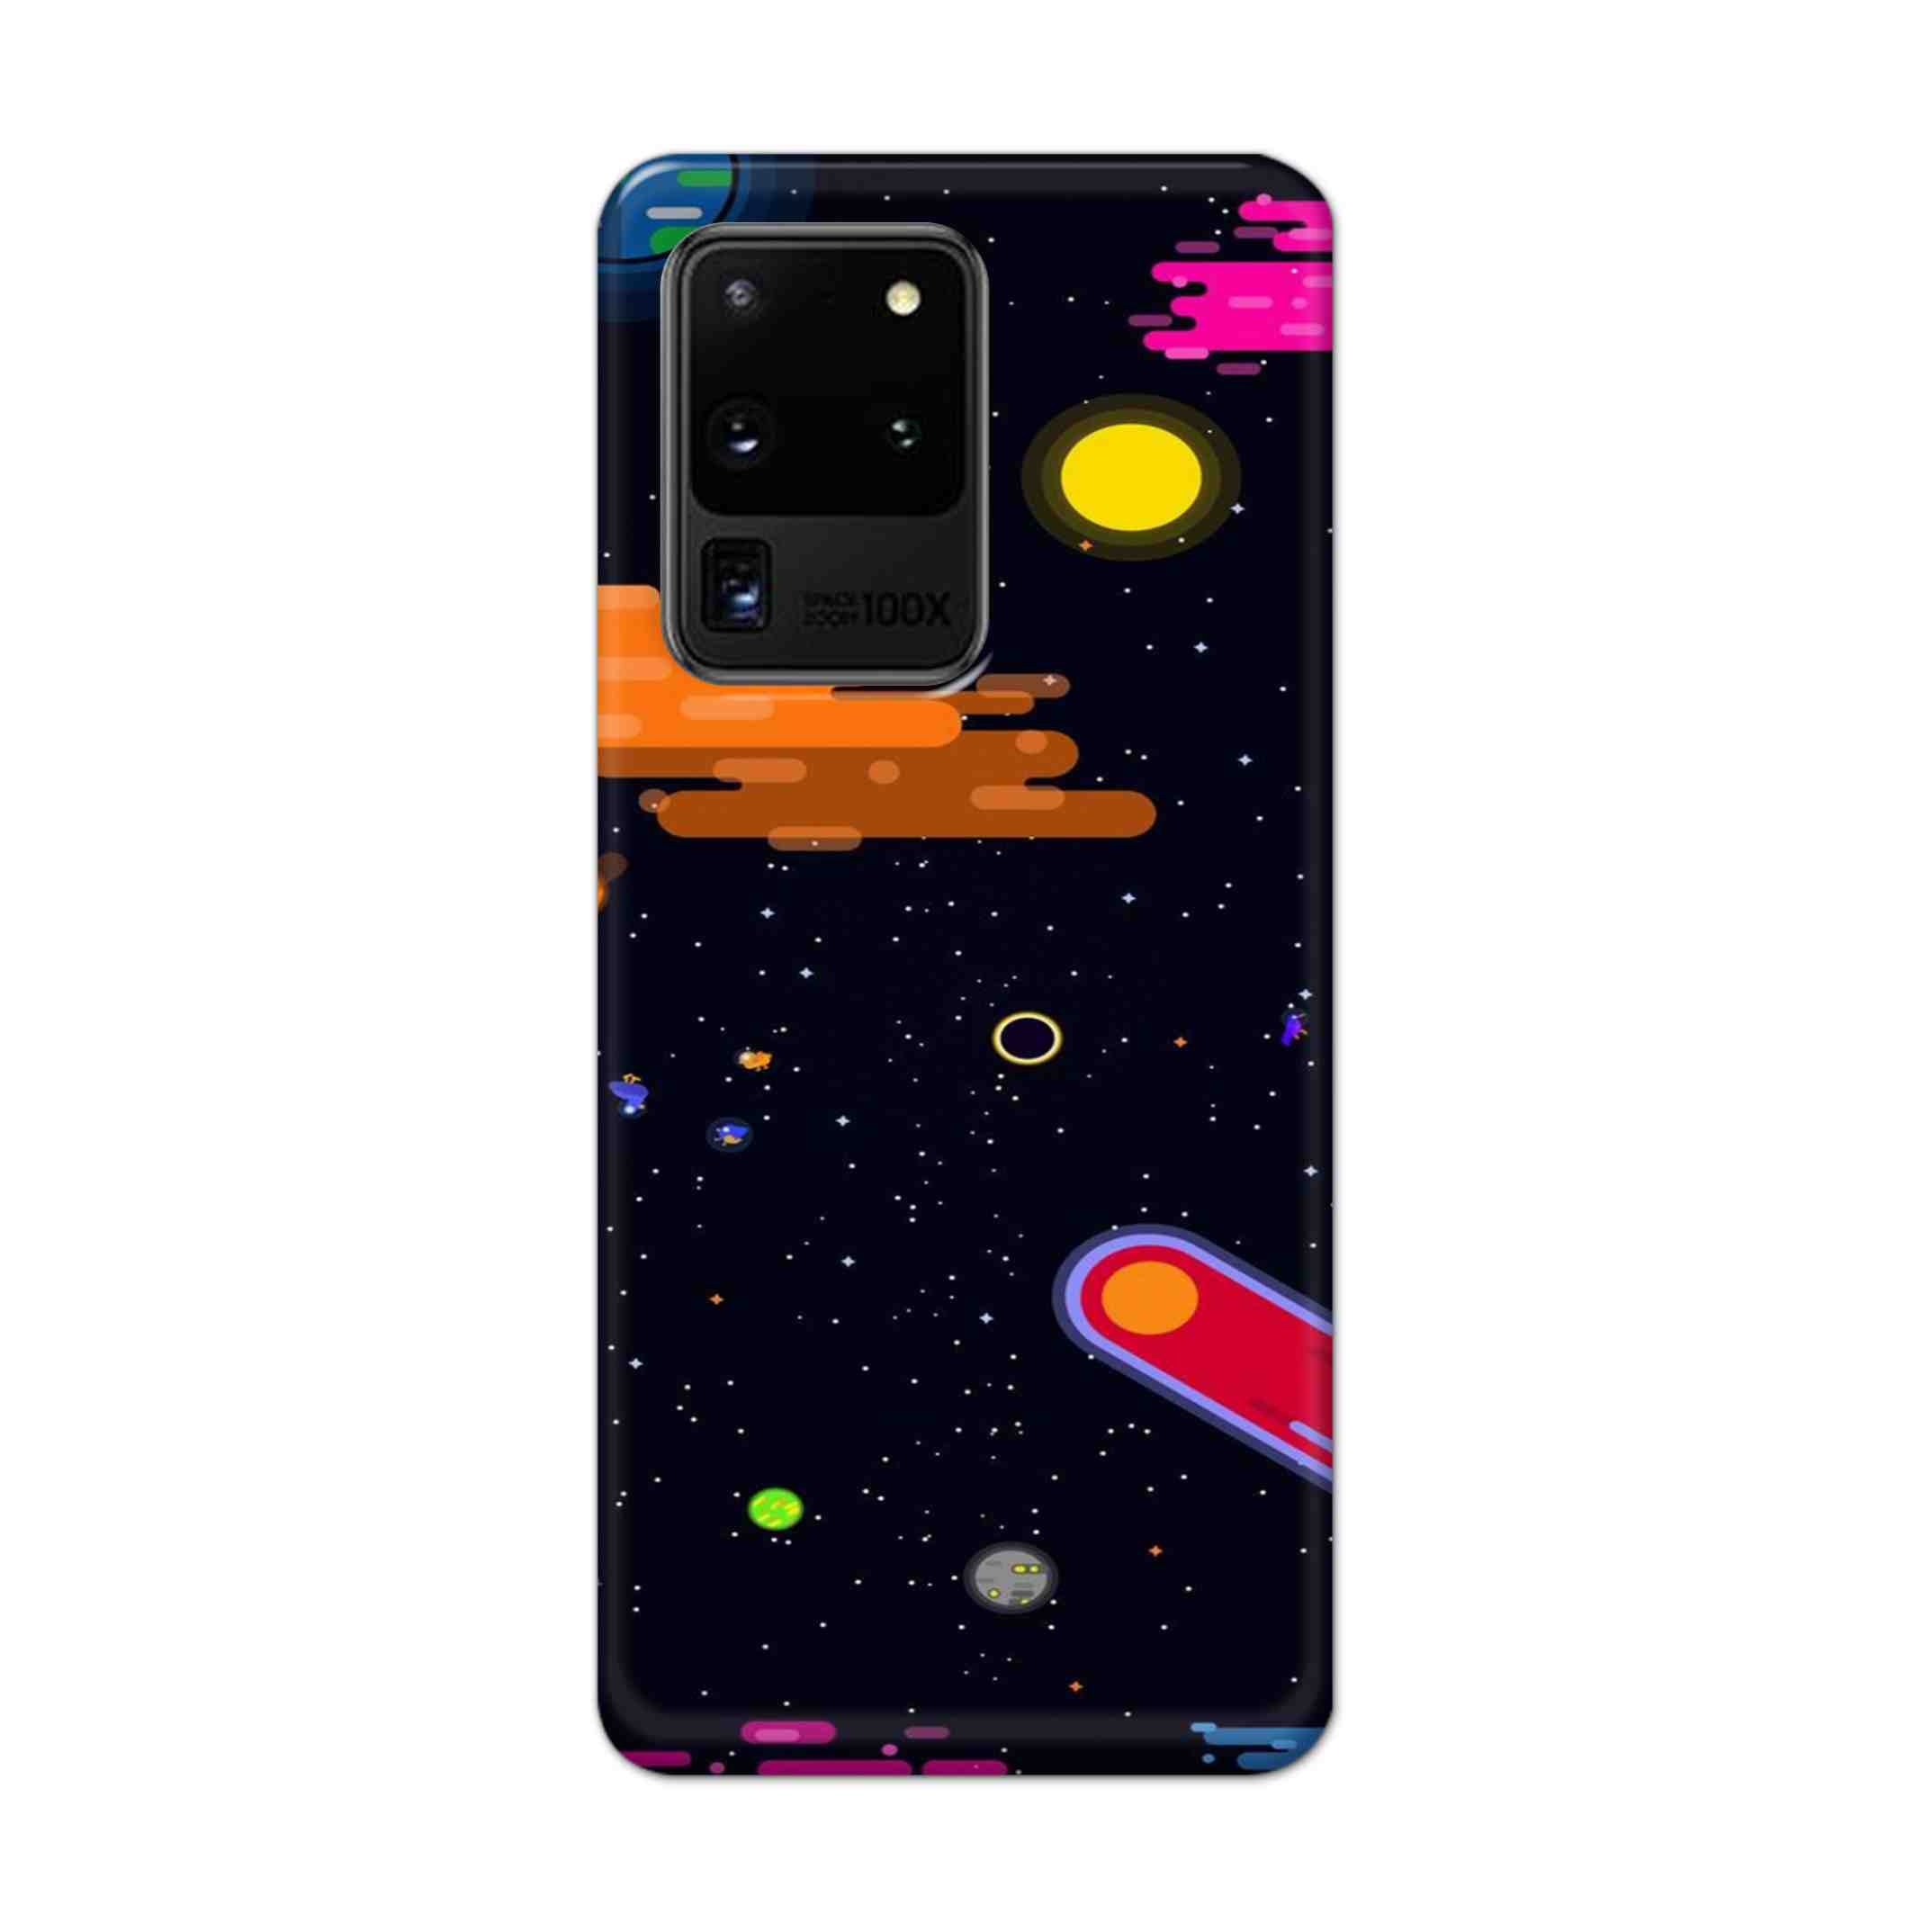 Buy Art Space Hard Back Mobile Phone Case Cover For Samsung Galaxy S20 Ultra Online